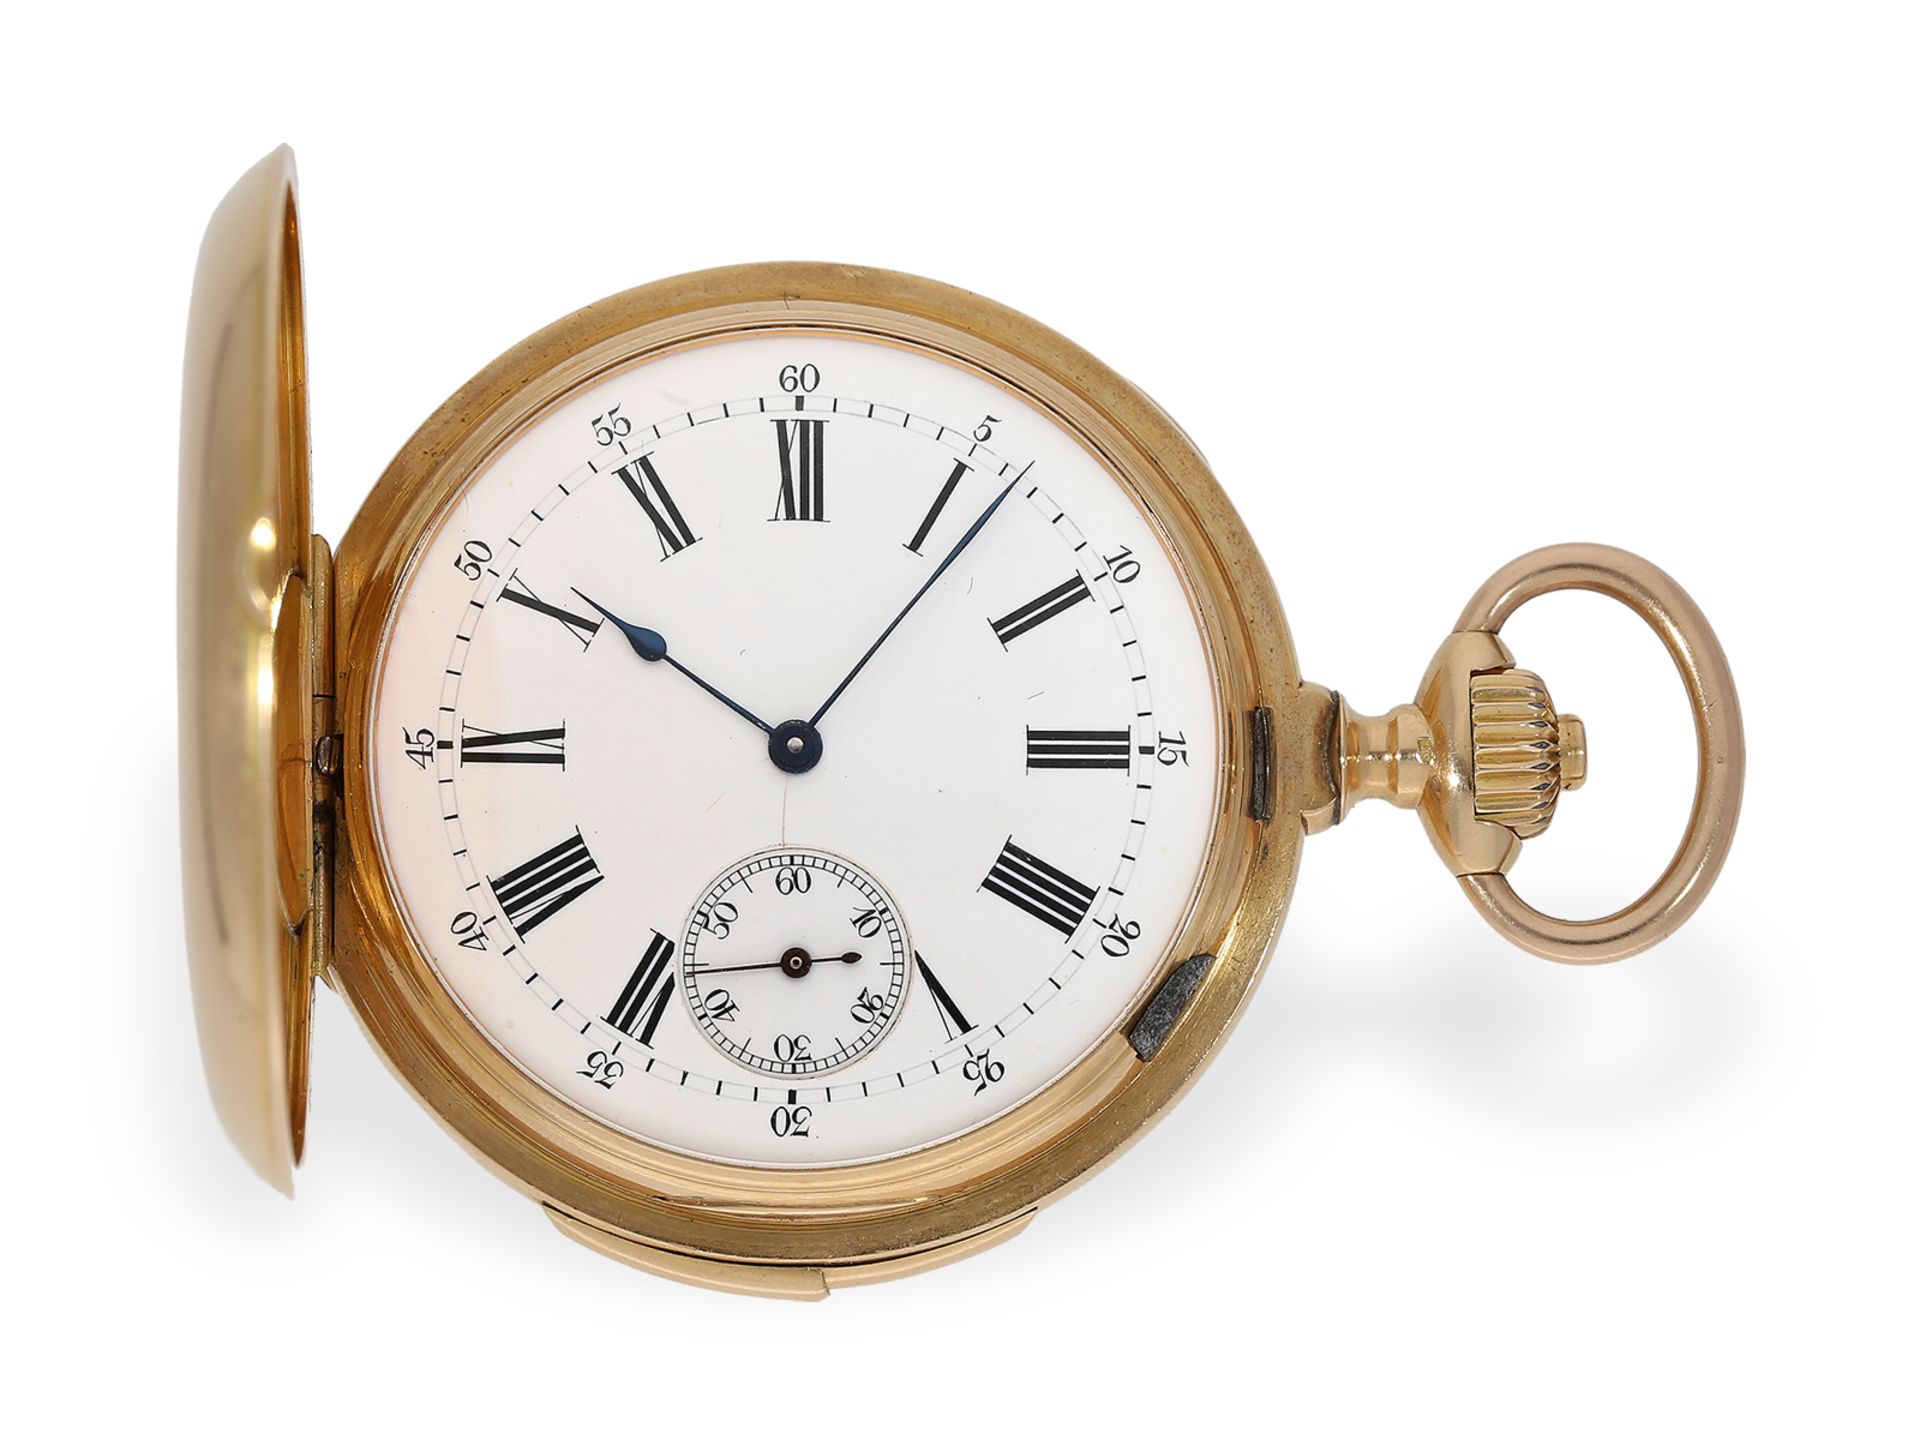 Pocket watch: very fine gold hunting case watch with repeater, probably Audemars Freres, ca. 1880